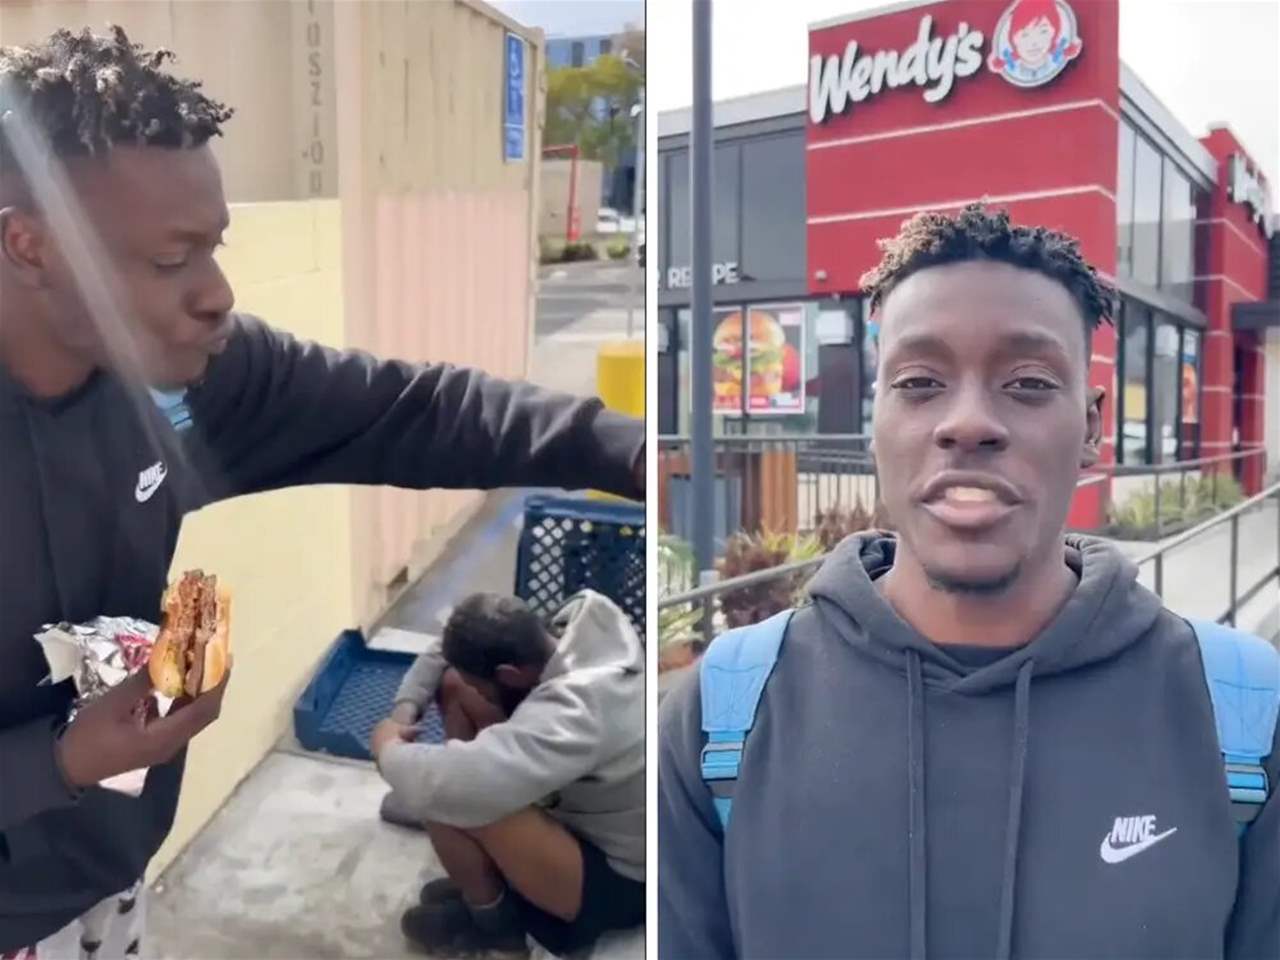 Watch a YouTuber who gave food to a homeless person and then ate it